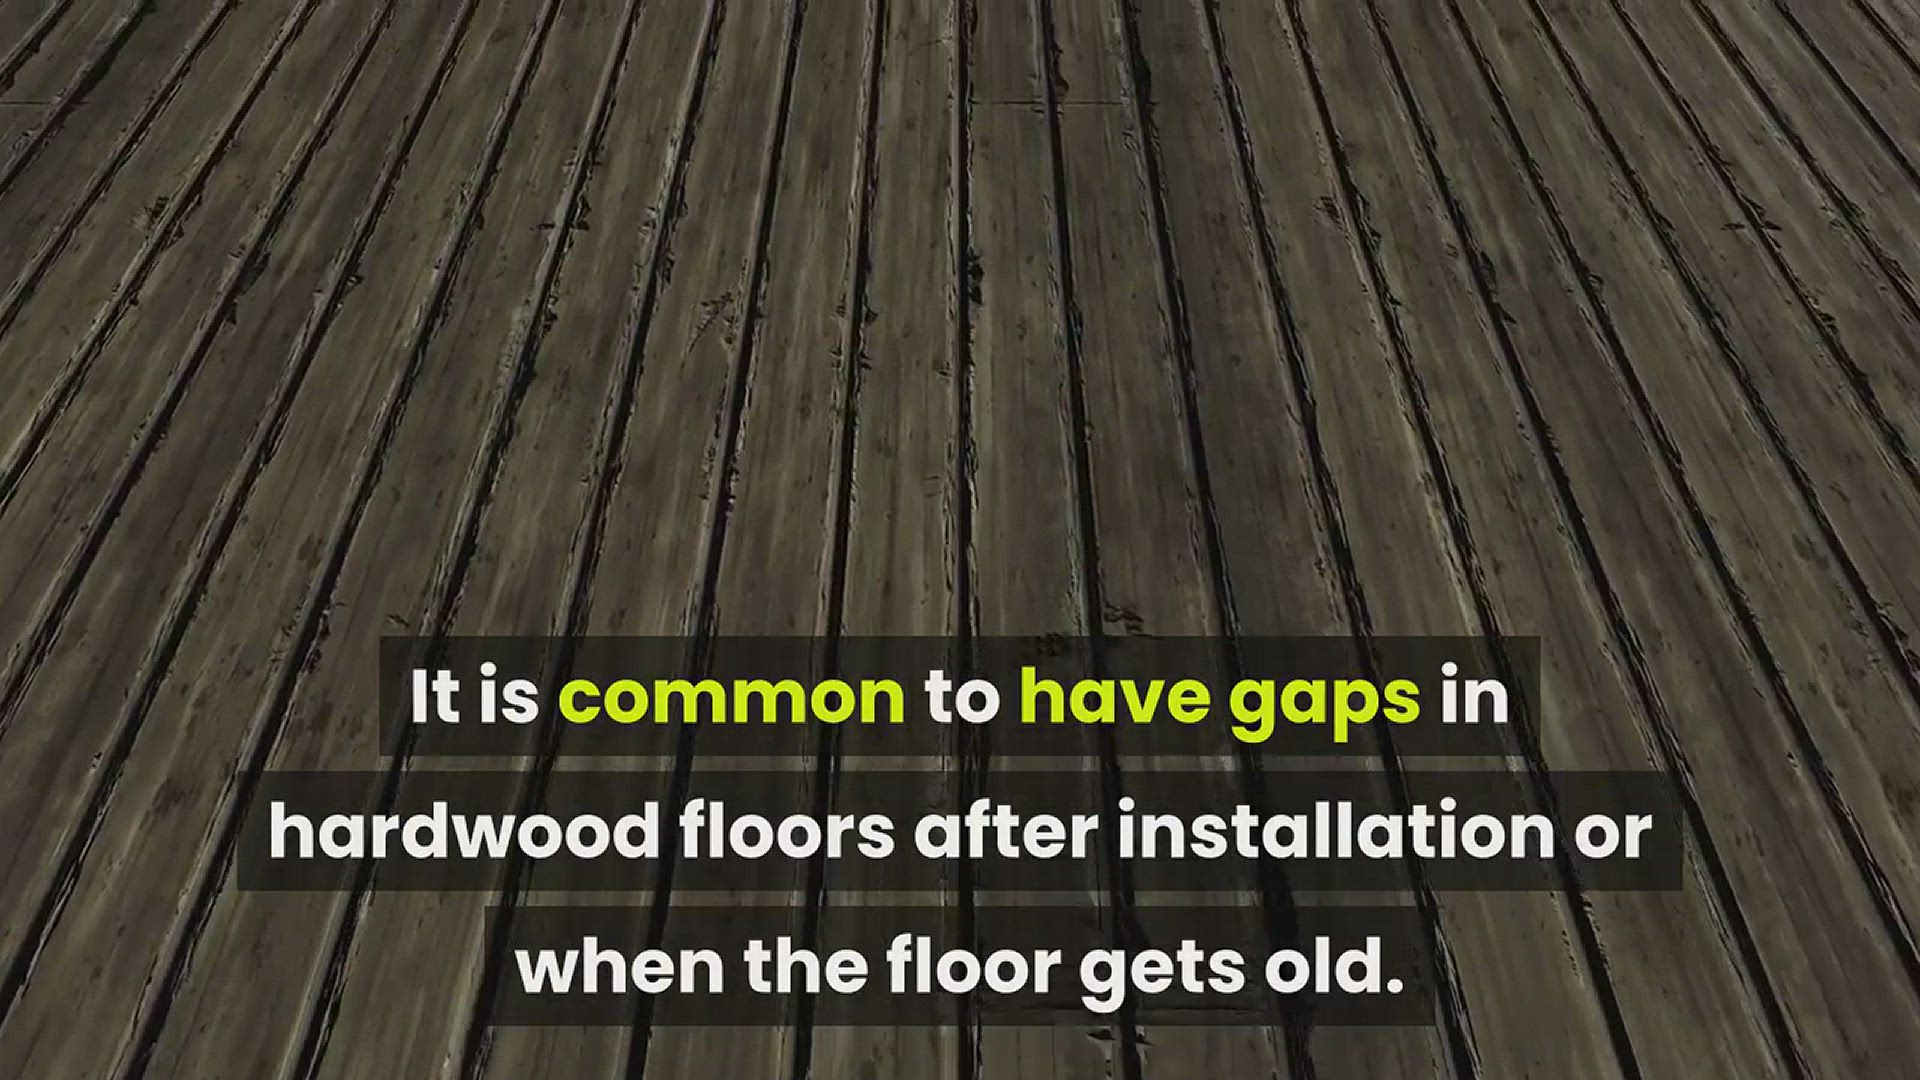 How To Get Paint Off Hardwood Floors, How To Remove Old Paint From Hardwood Floors